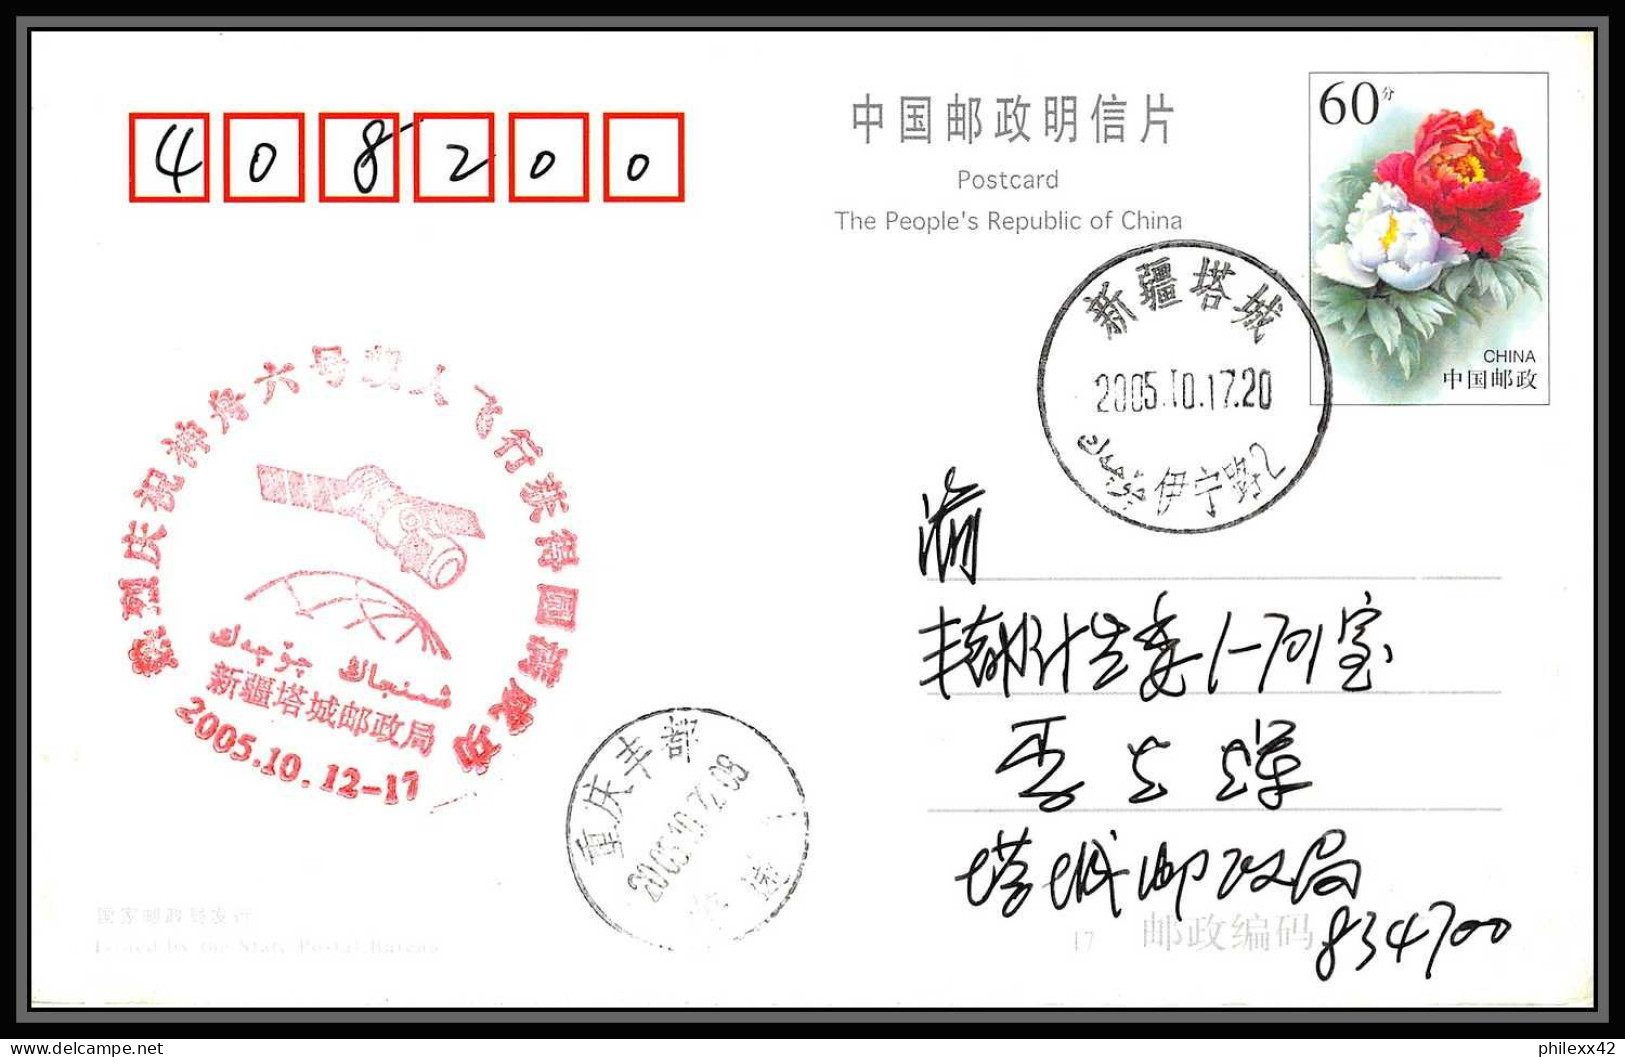 1360 Espace (space) Lot De 3 Entier Postal (Stamped Stationery) CHINE (china) SHENZHOU 6 Junlong / Haisheng 17/10/2005 - Asie